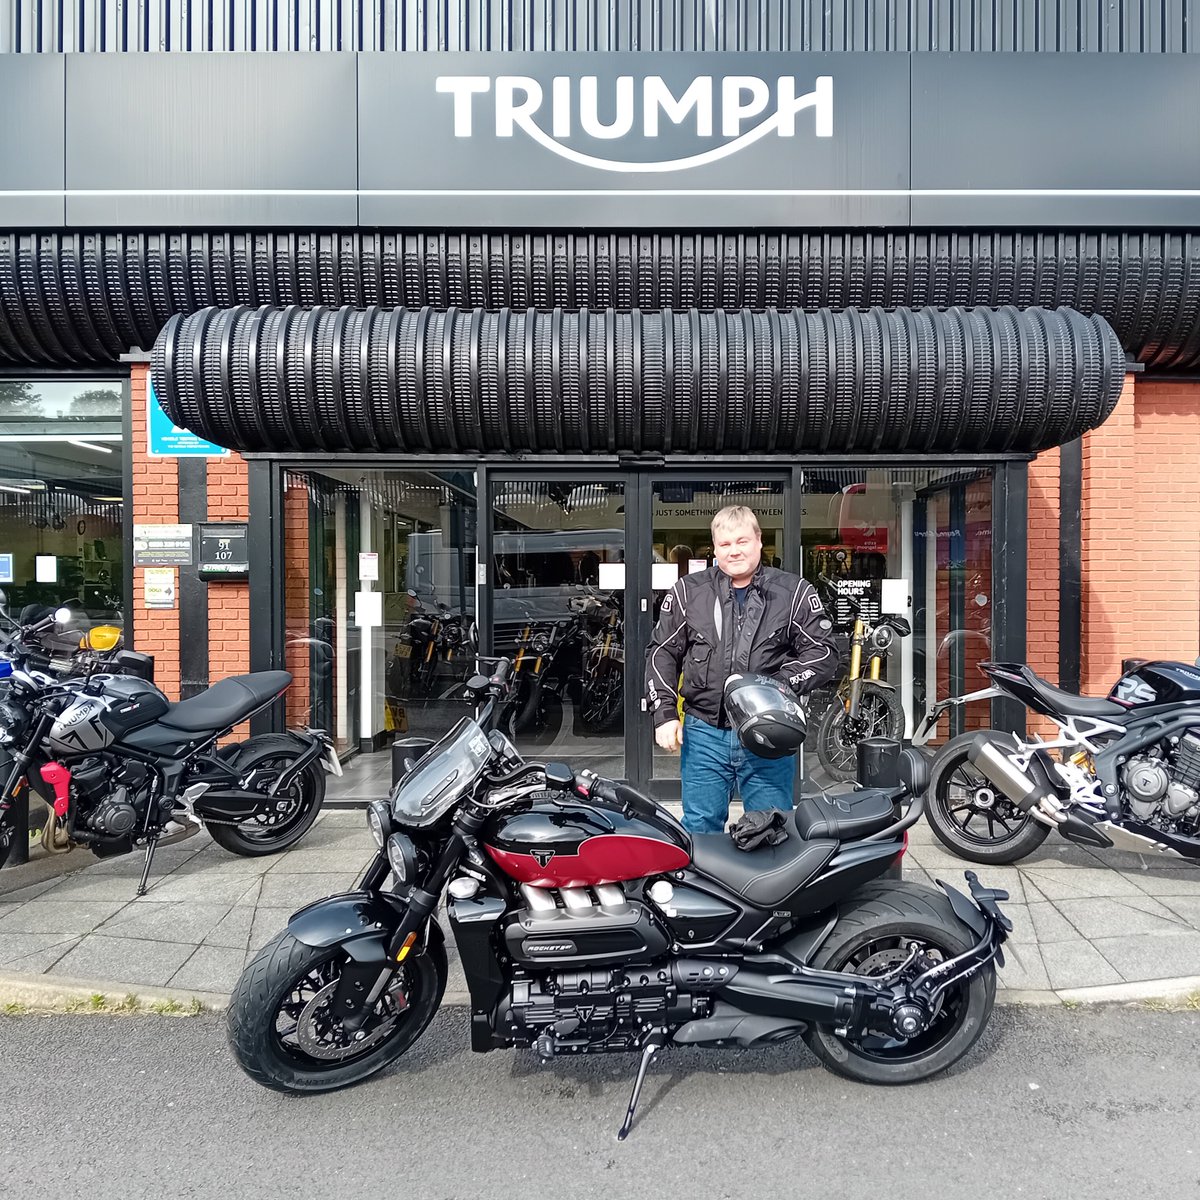 Lovely day for a handover - Richard enjoy your Rocket 3 Storm GT

Have many Happy Miles of riding

#Streetbike #Triumph #Rocket3StormGT #HappyMiles